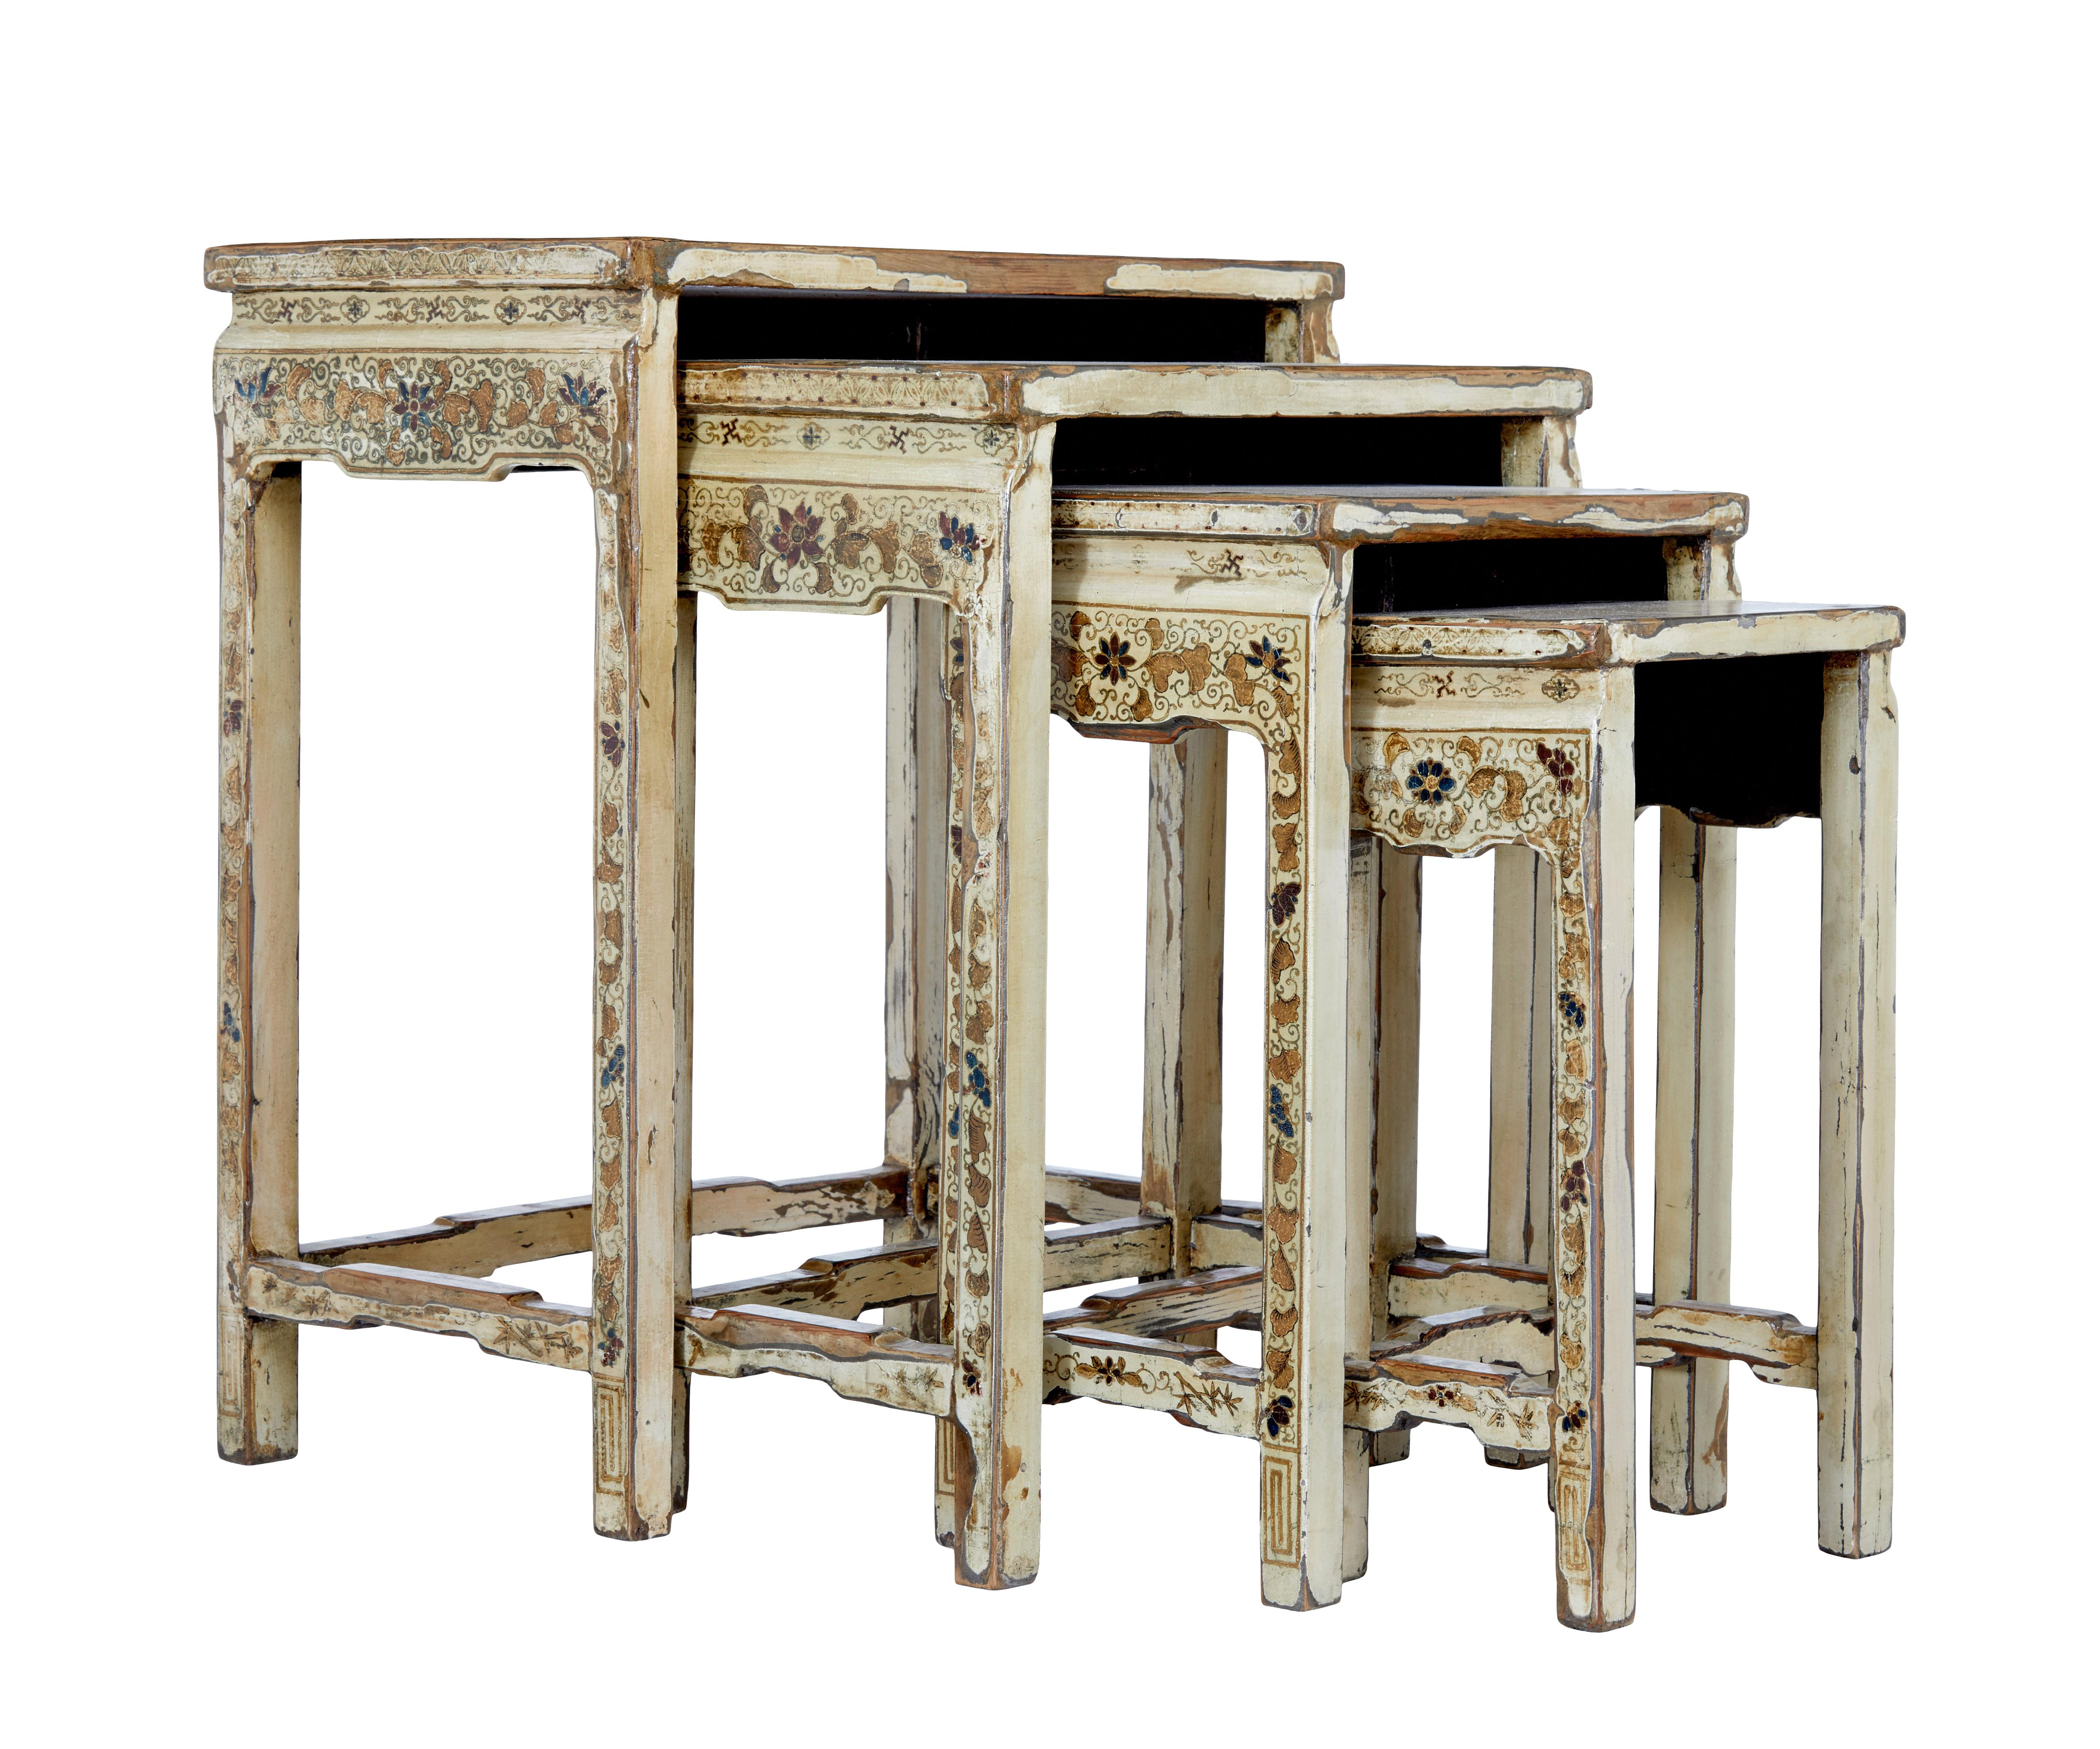 Hand-Crafted Early 20th Century Nest of 4 Lacquered and Decorated Tables